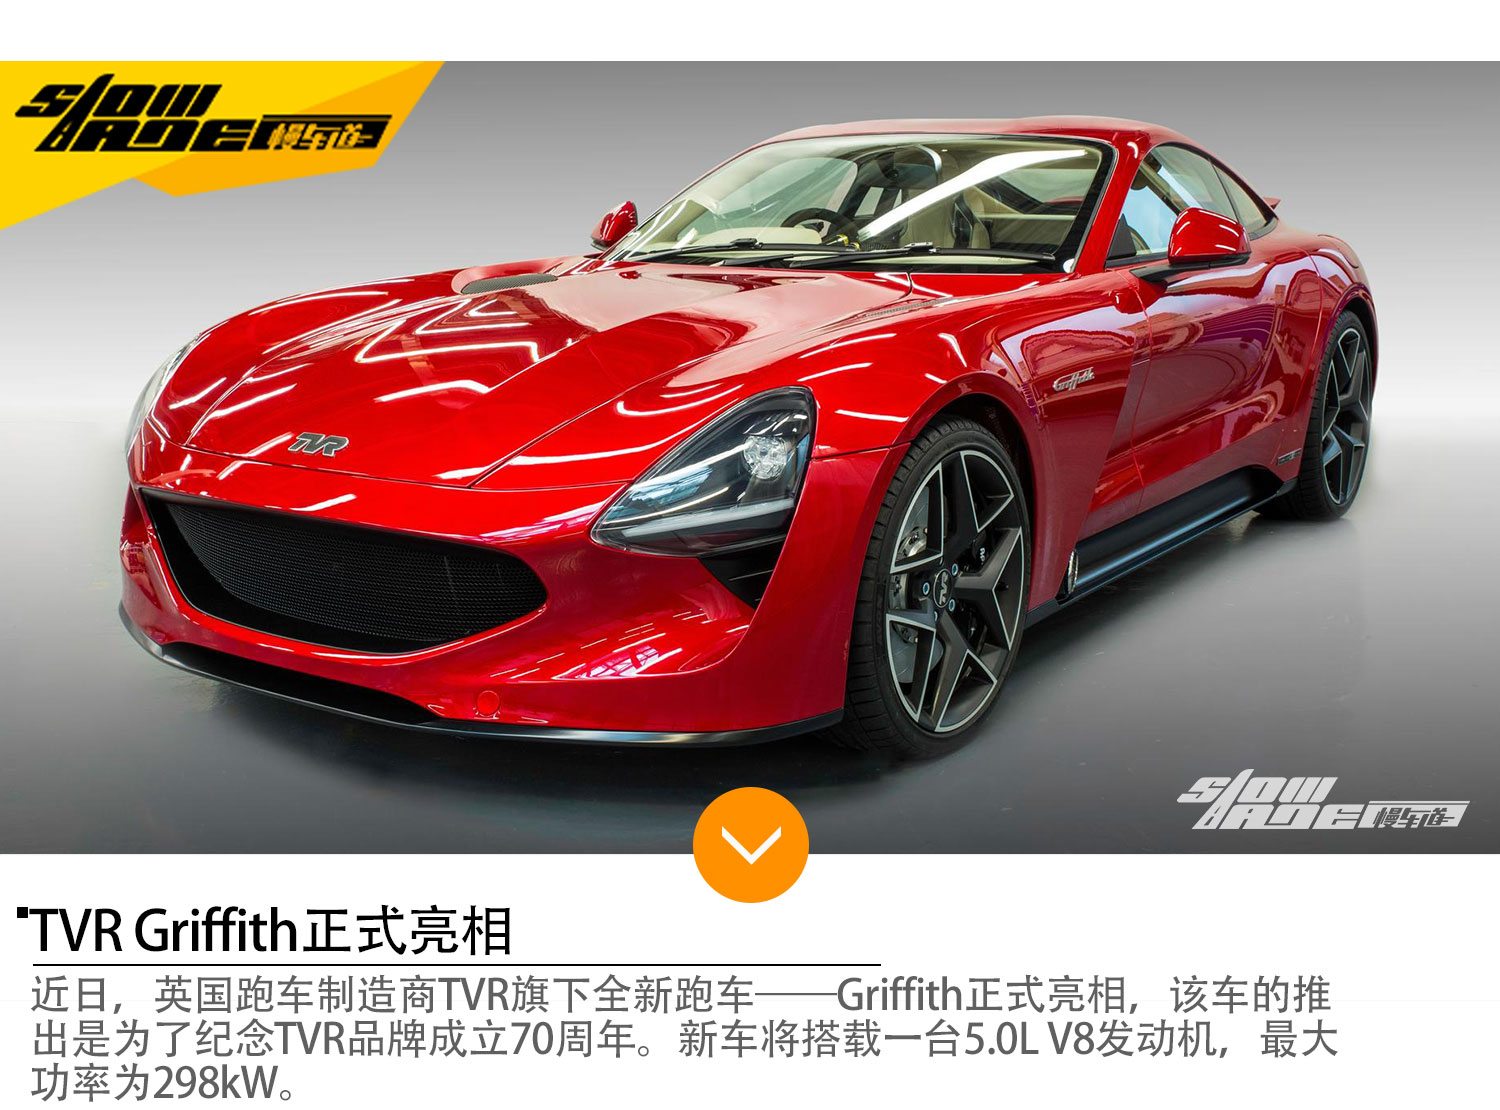 TVR Griffith正式亮相 搭5.0L V8发动机